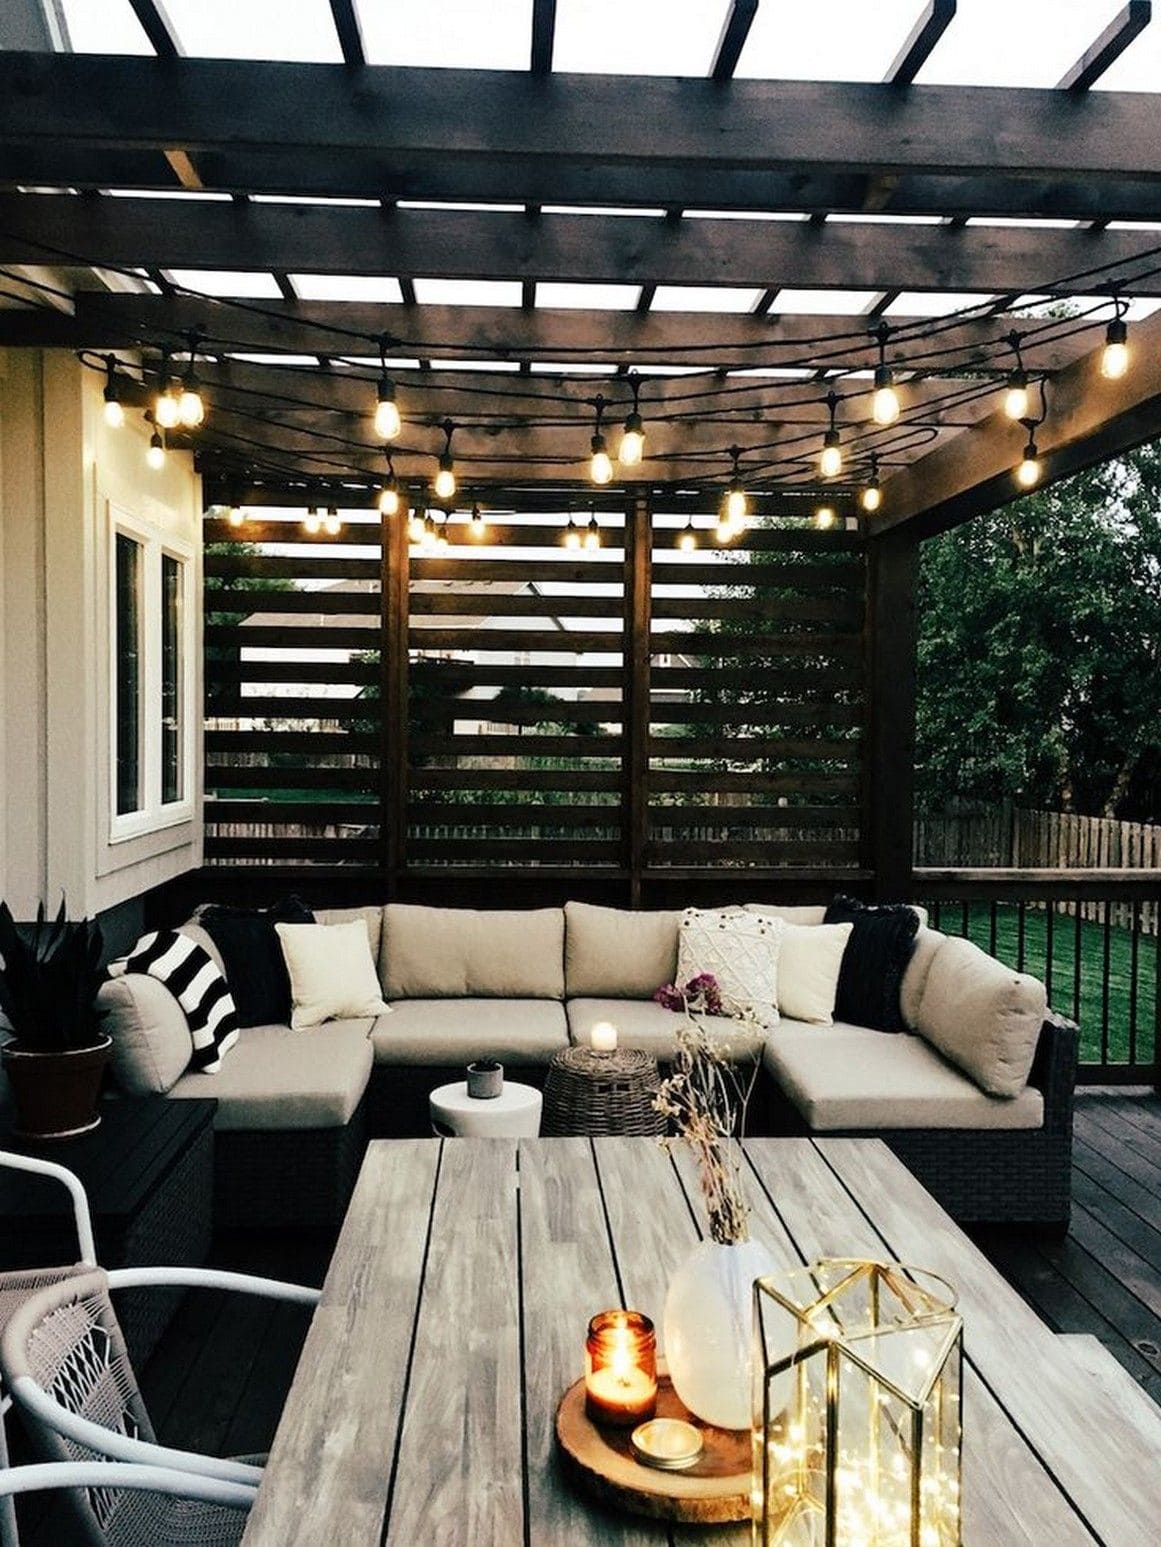 25 fabulous ideas to turn patios into inviting outdoor spaces - 83